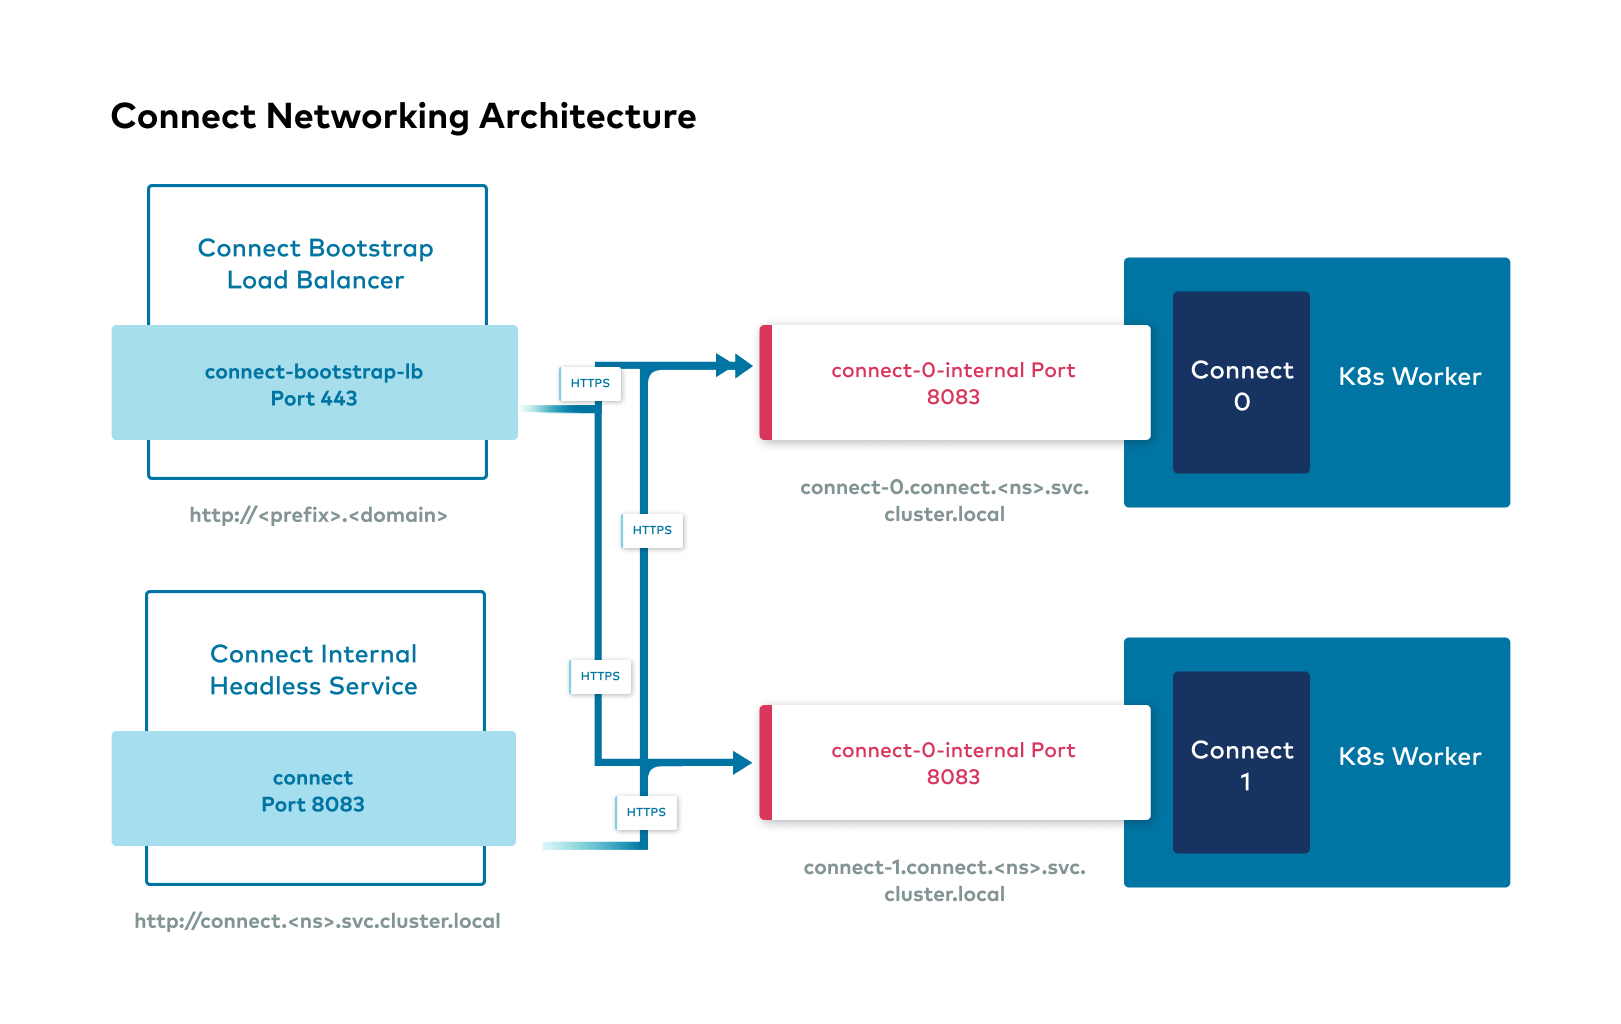 _images/20210428-Connect_Networking_Architecture.png